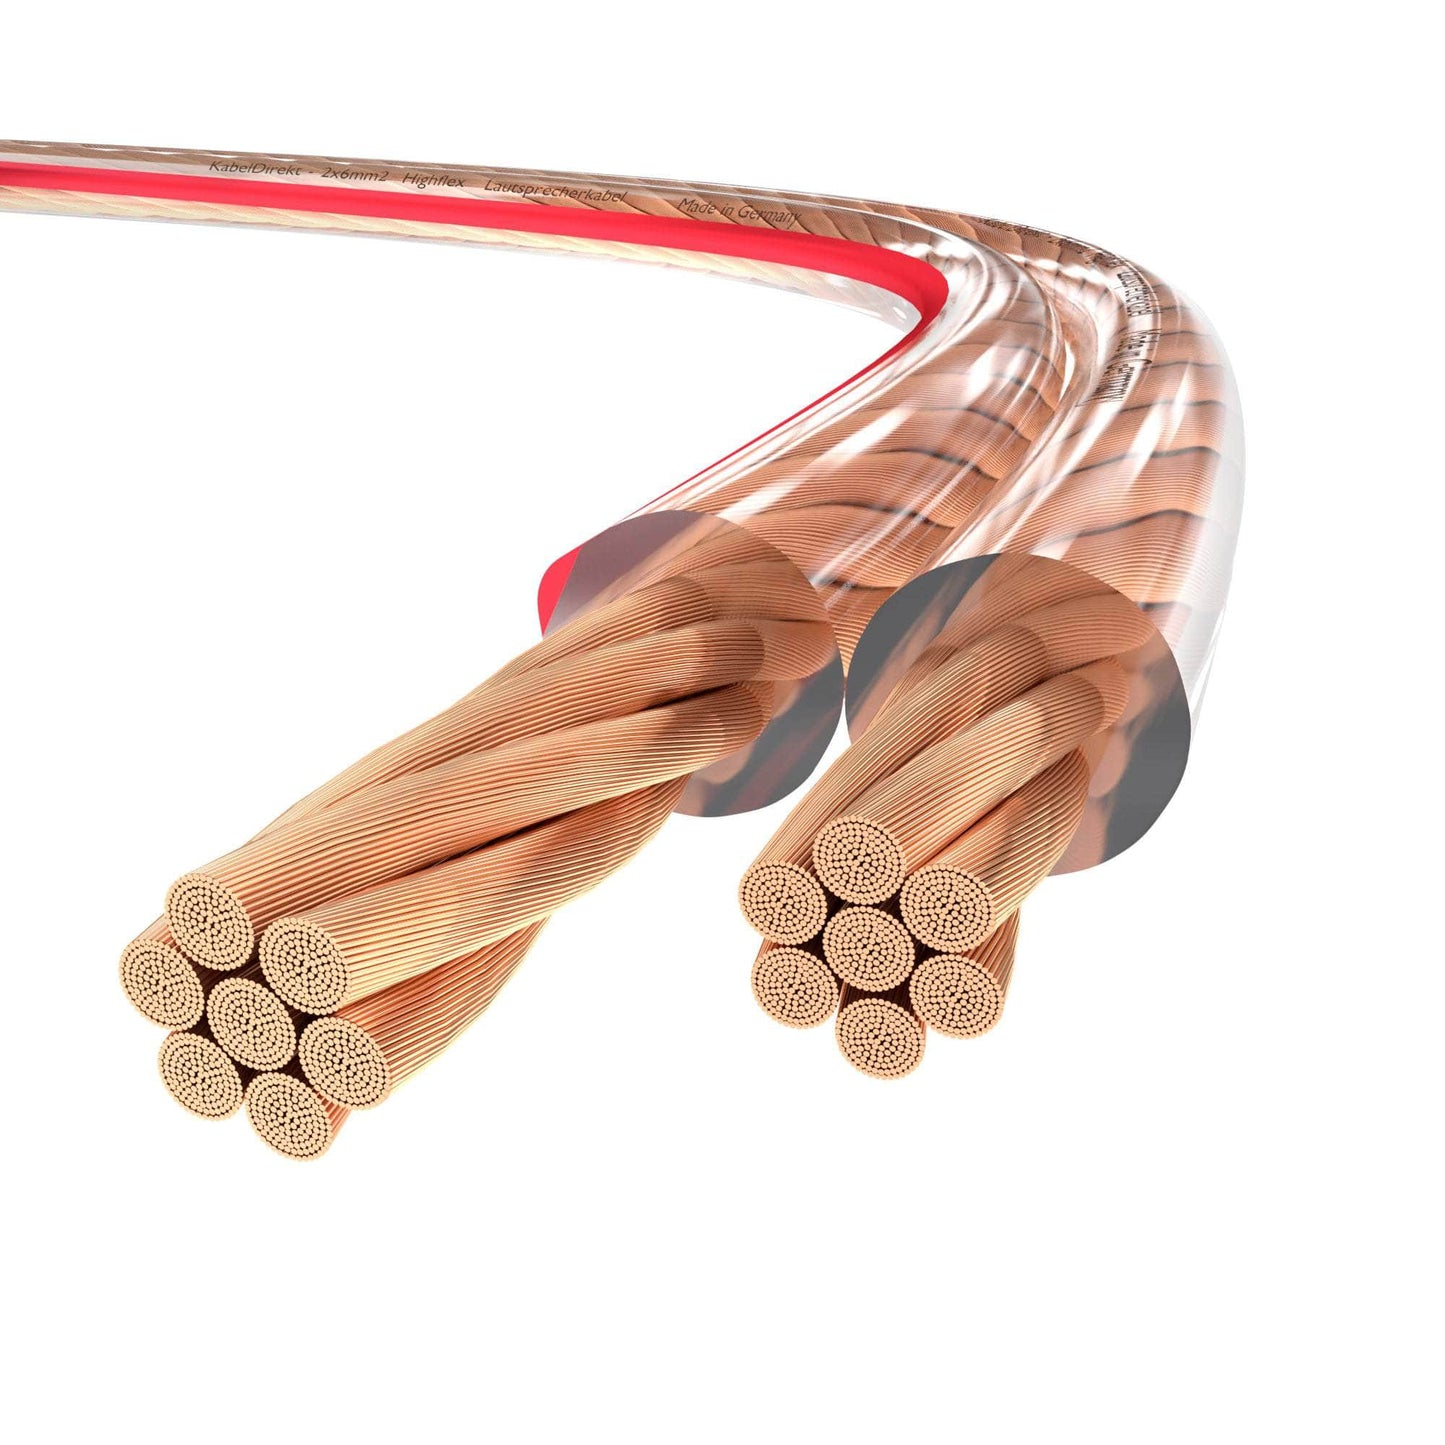 Pure copper speaker cables – Stereo speaker cables Made in Germany with polarity markings